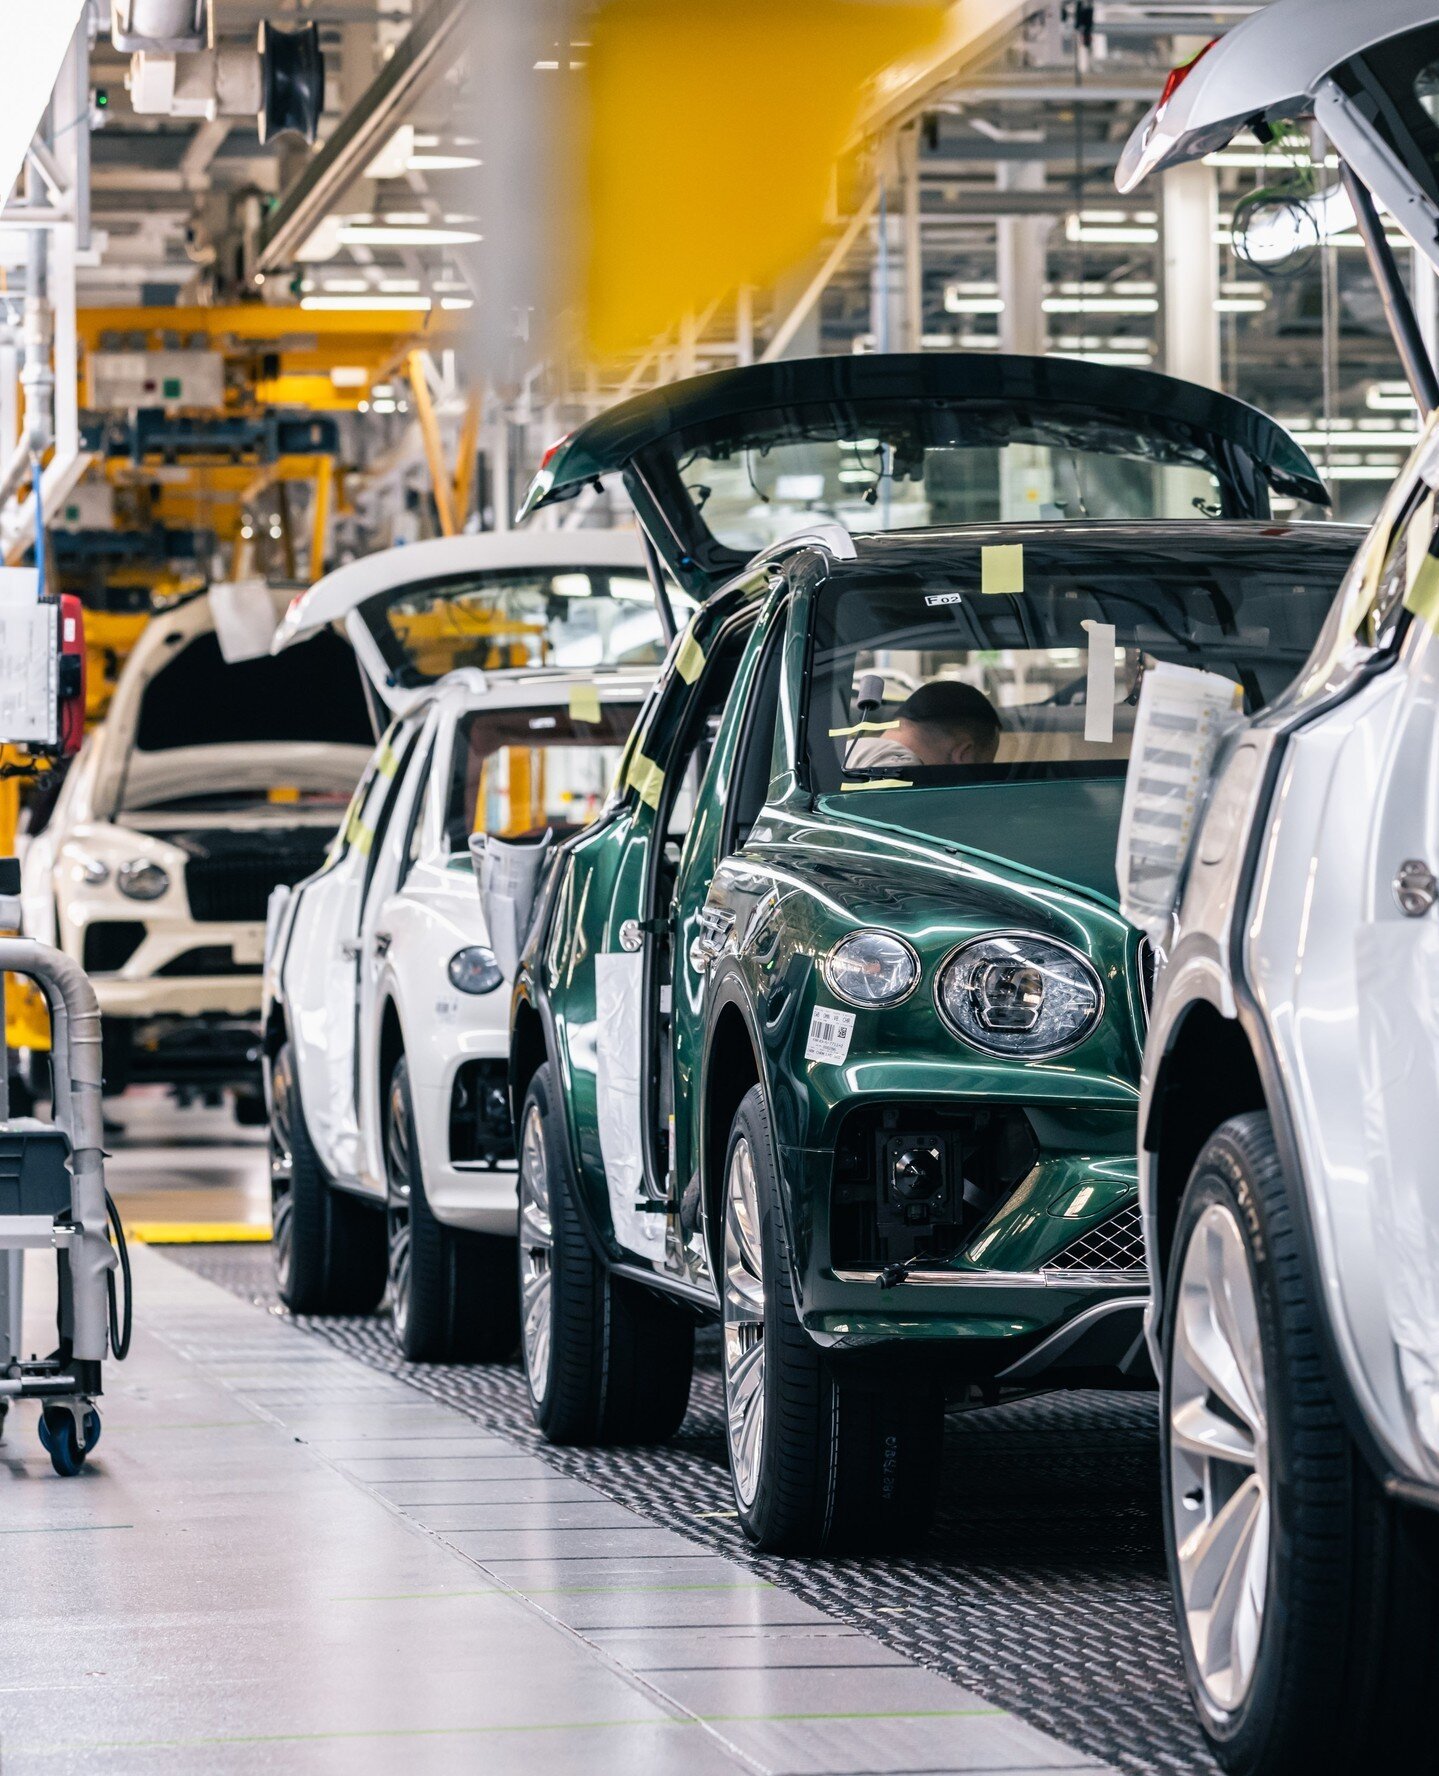 Earlier this week, we invited @jaxjones to tour the @bentleymotors factory, and he gained hands-on insights into how the exceptional cars are made. ⁠
⁠
⁠
#pragency #london #luxurycommunications #carlifestyle #supercar #cargram #automotive